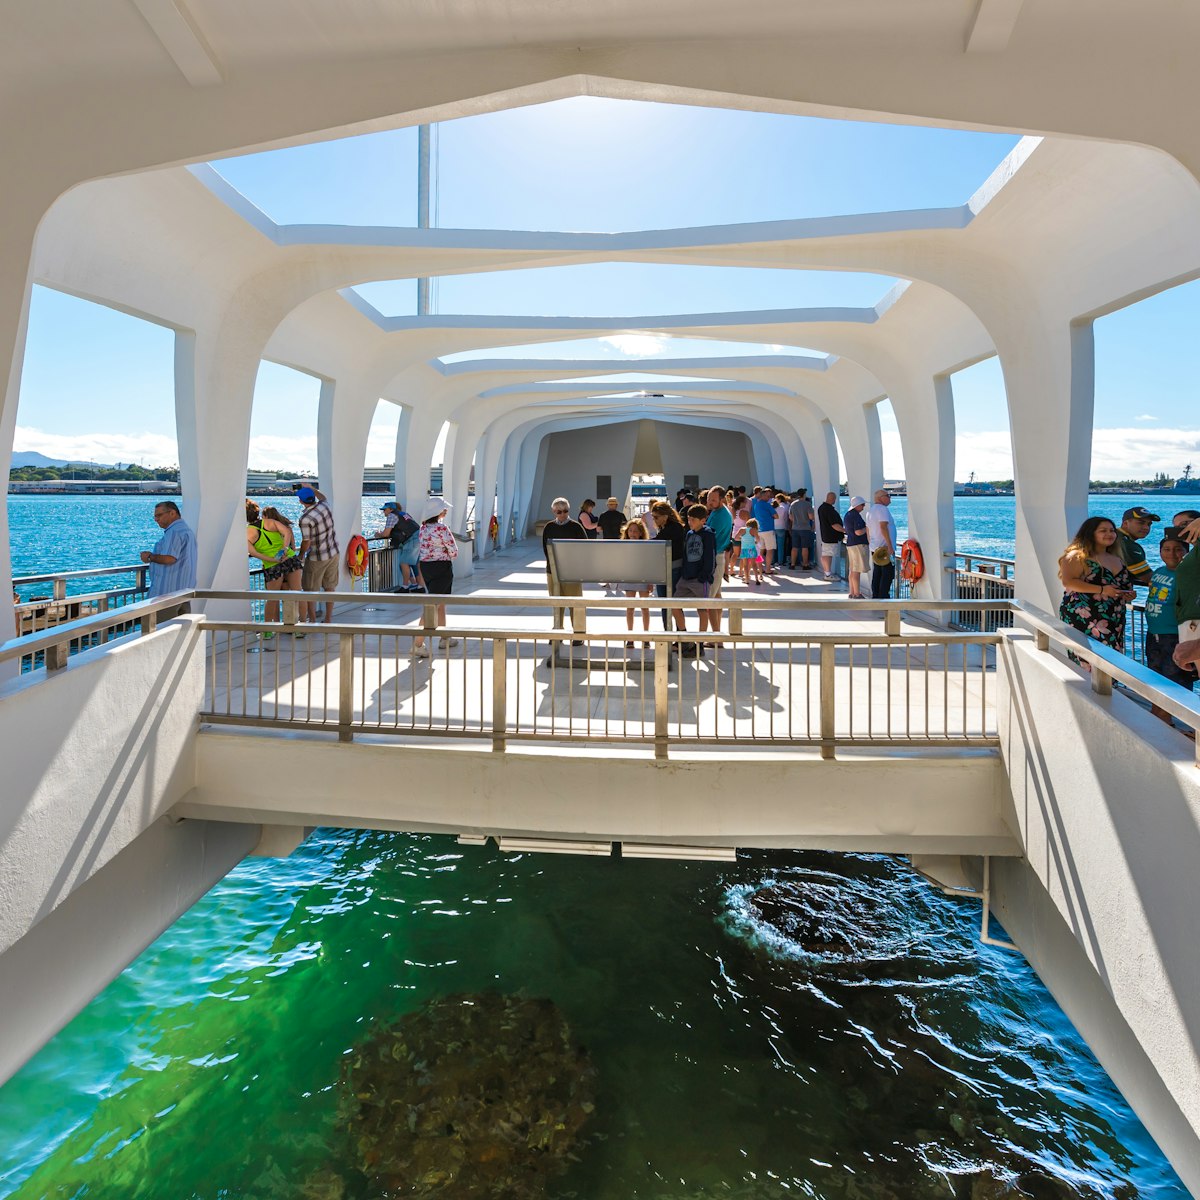 The USS Arizona Memorial straddles the sunken hull of the battleship without touching it. 